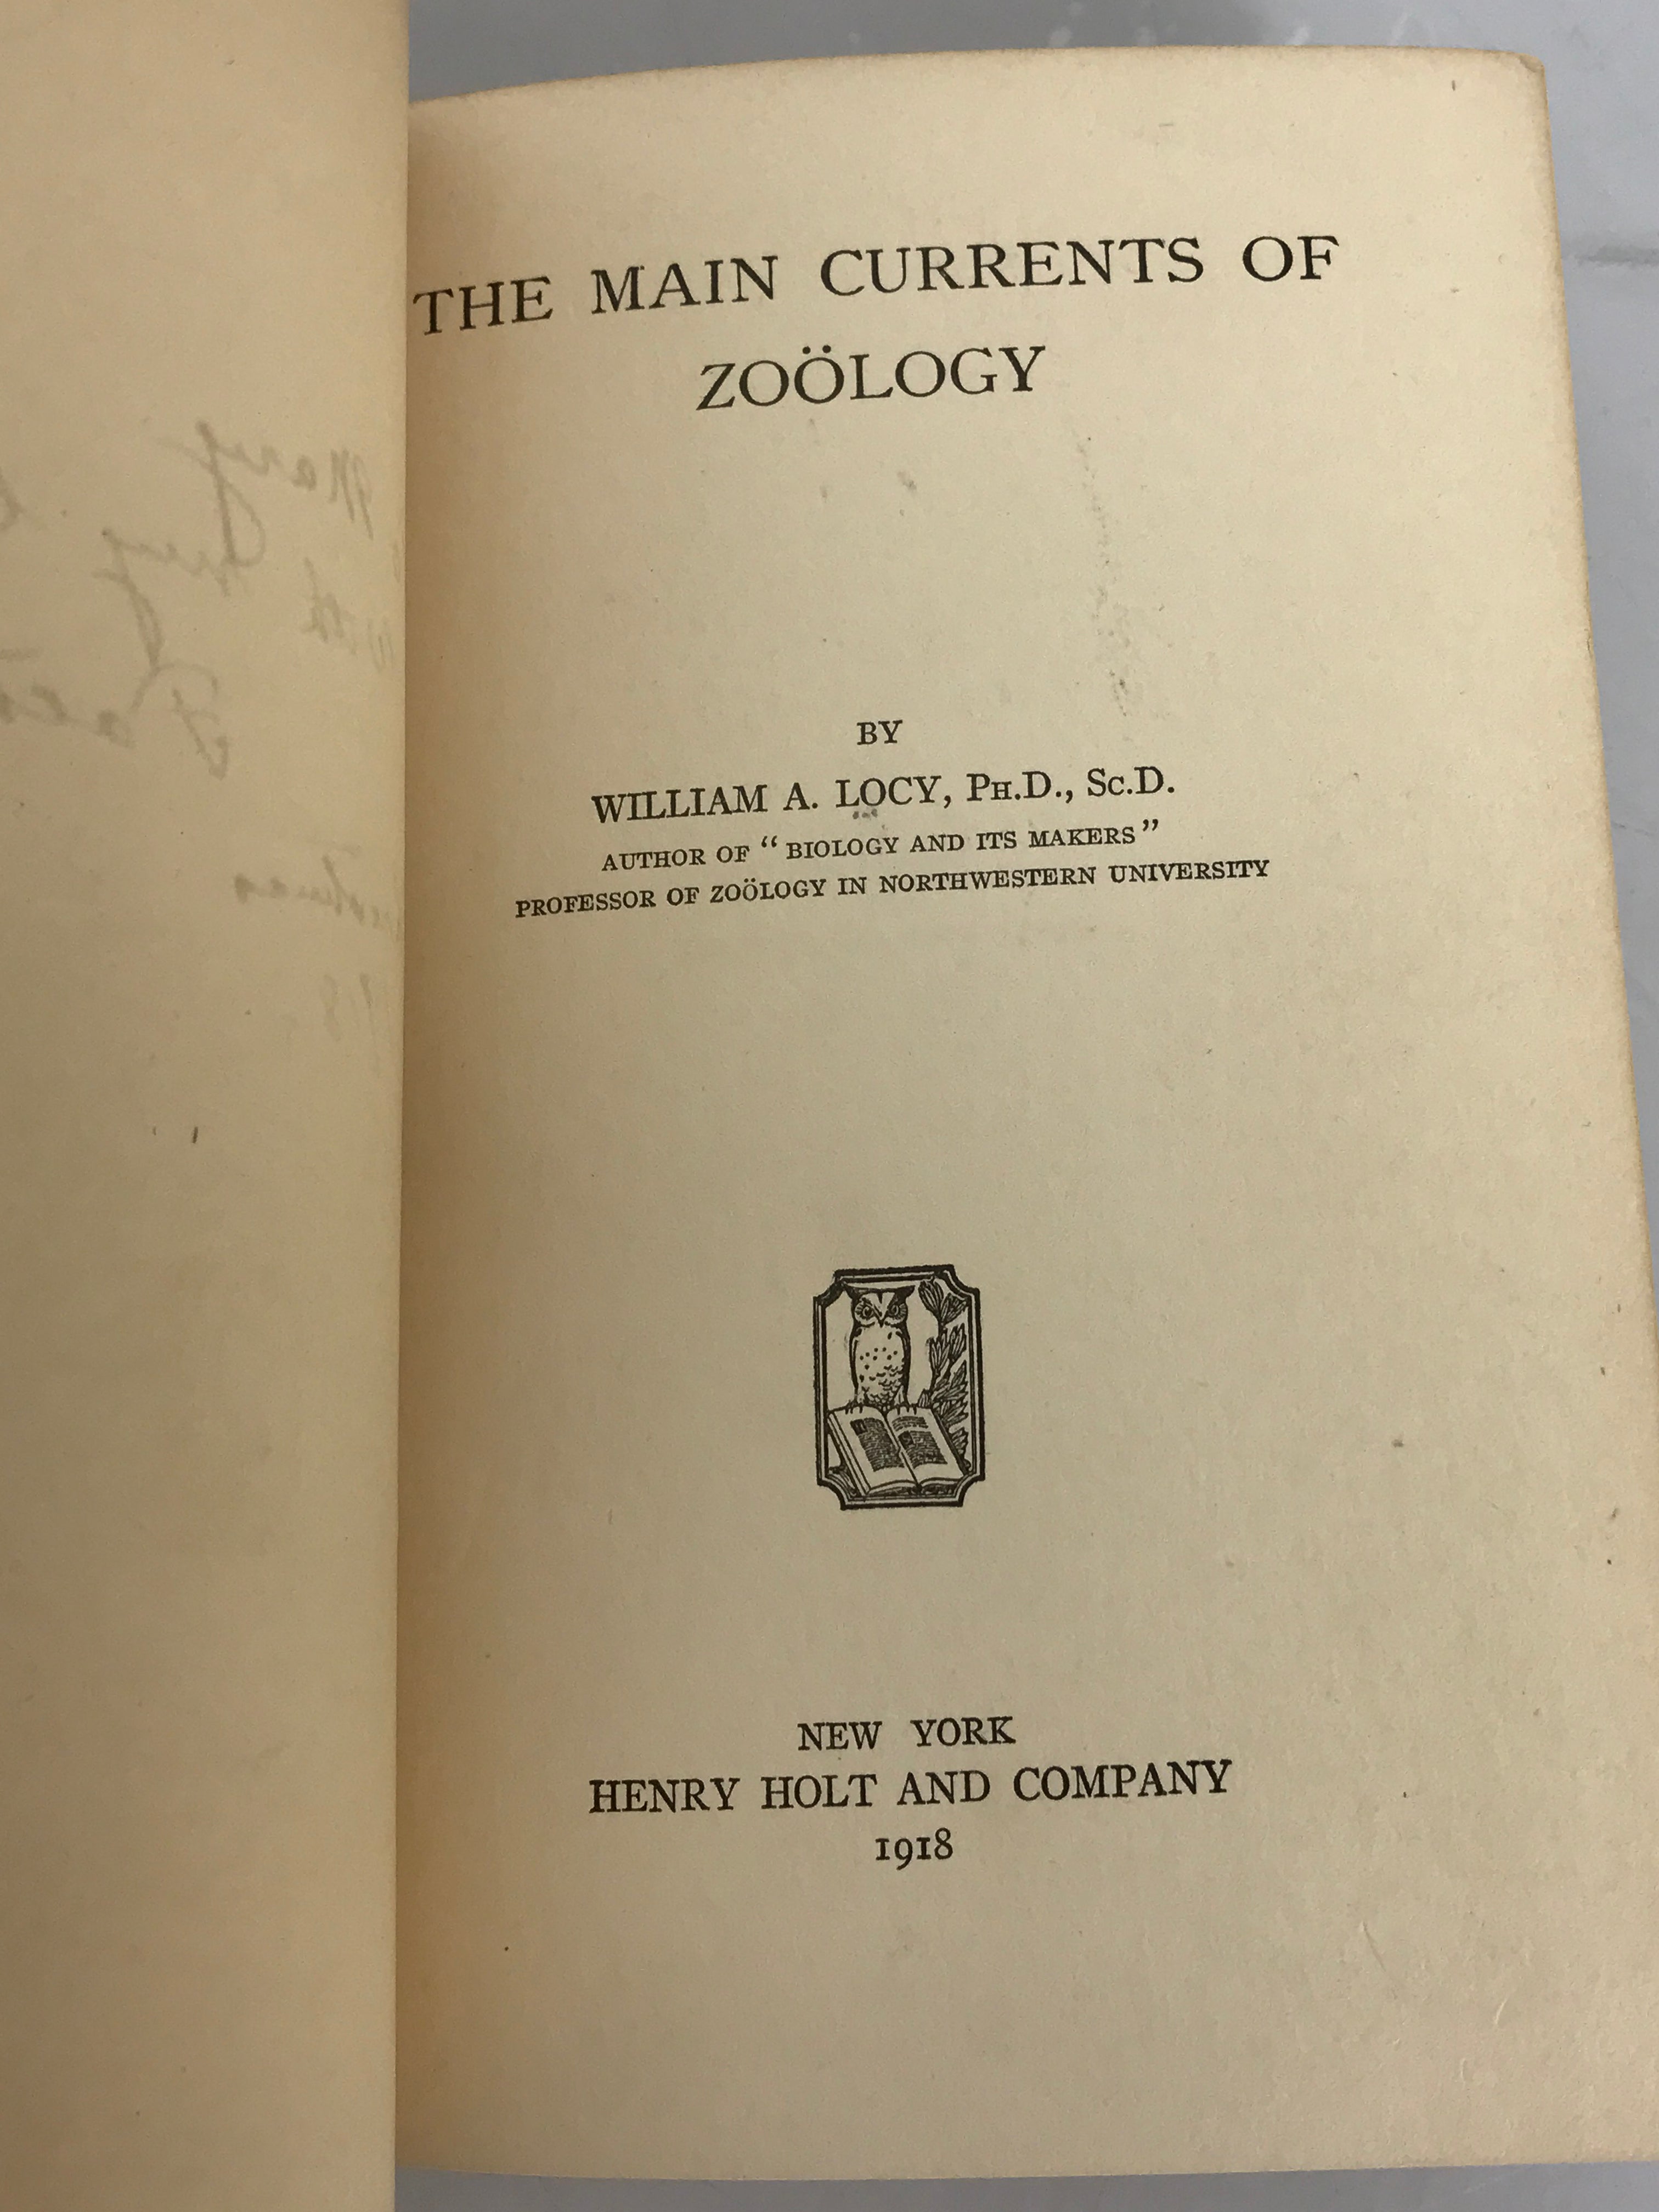 The Main Currents of Zoology by William A. Locy 1918 Henry Holt and Company HC Rare